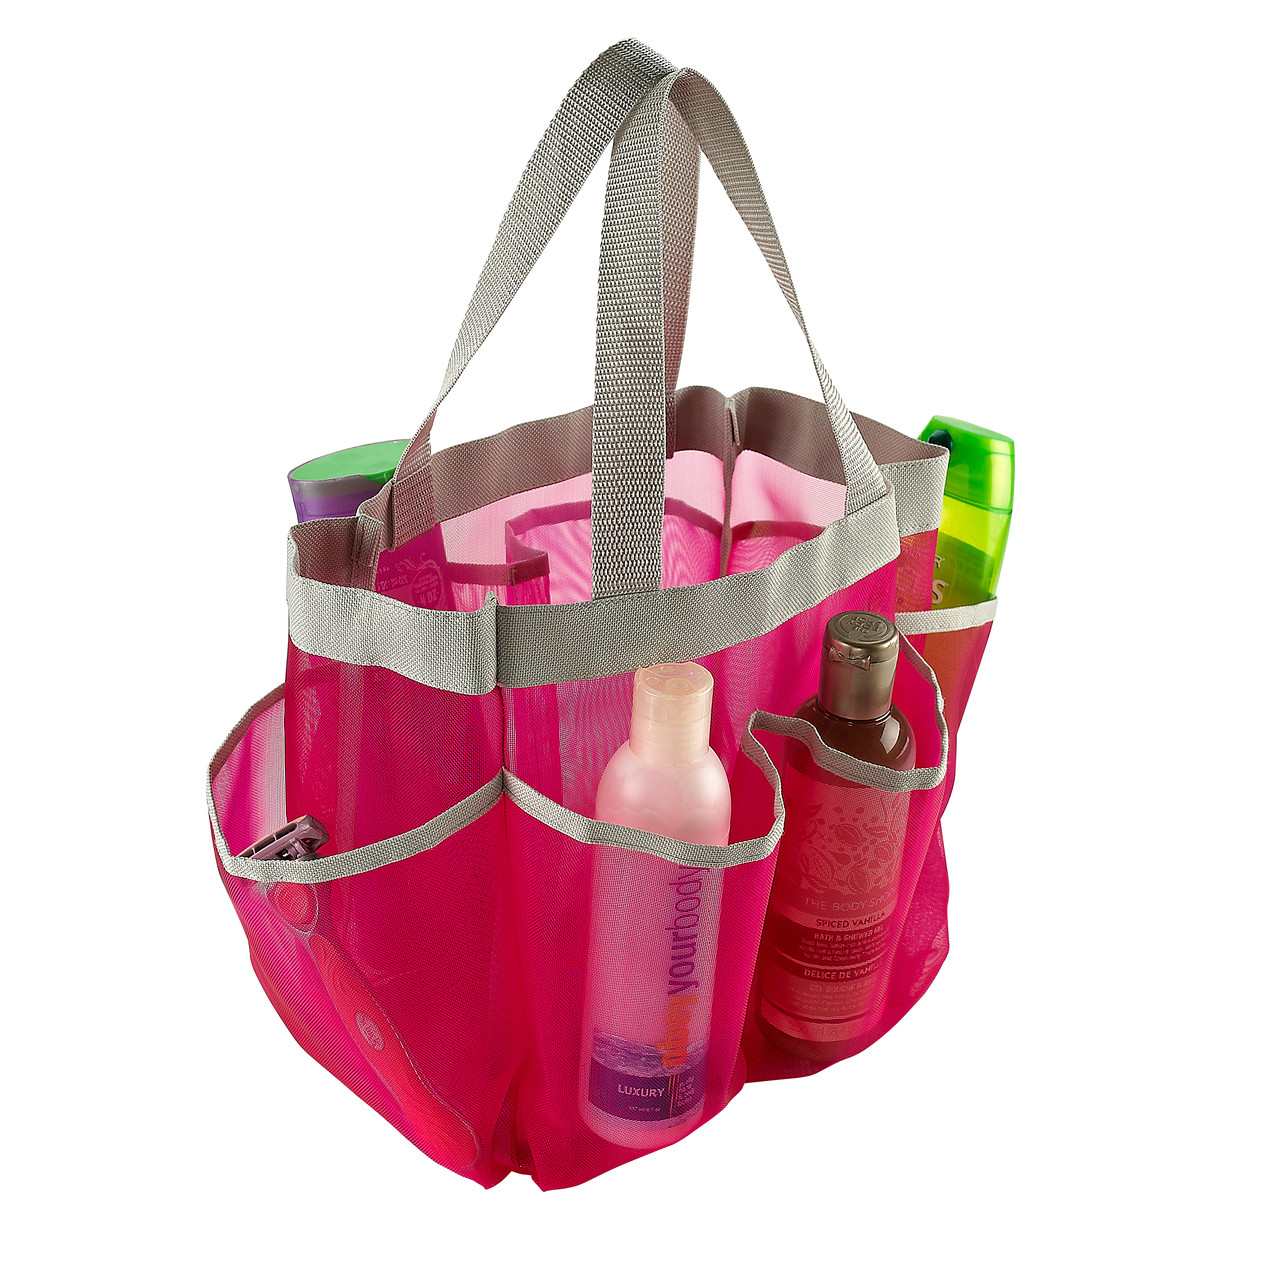 Mesh Shower Caddy Tote, 7 Pockets